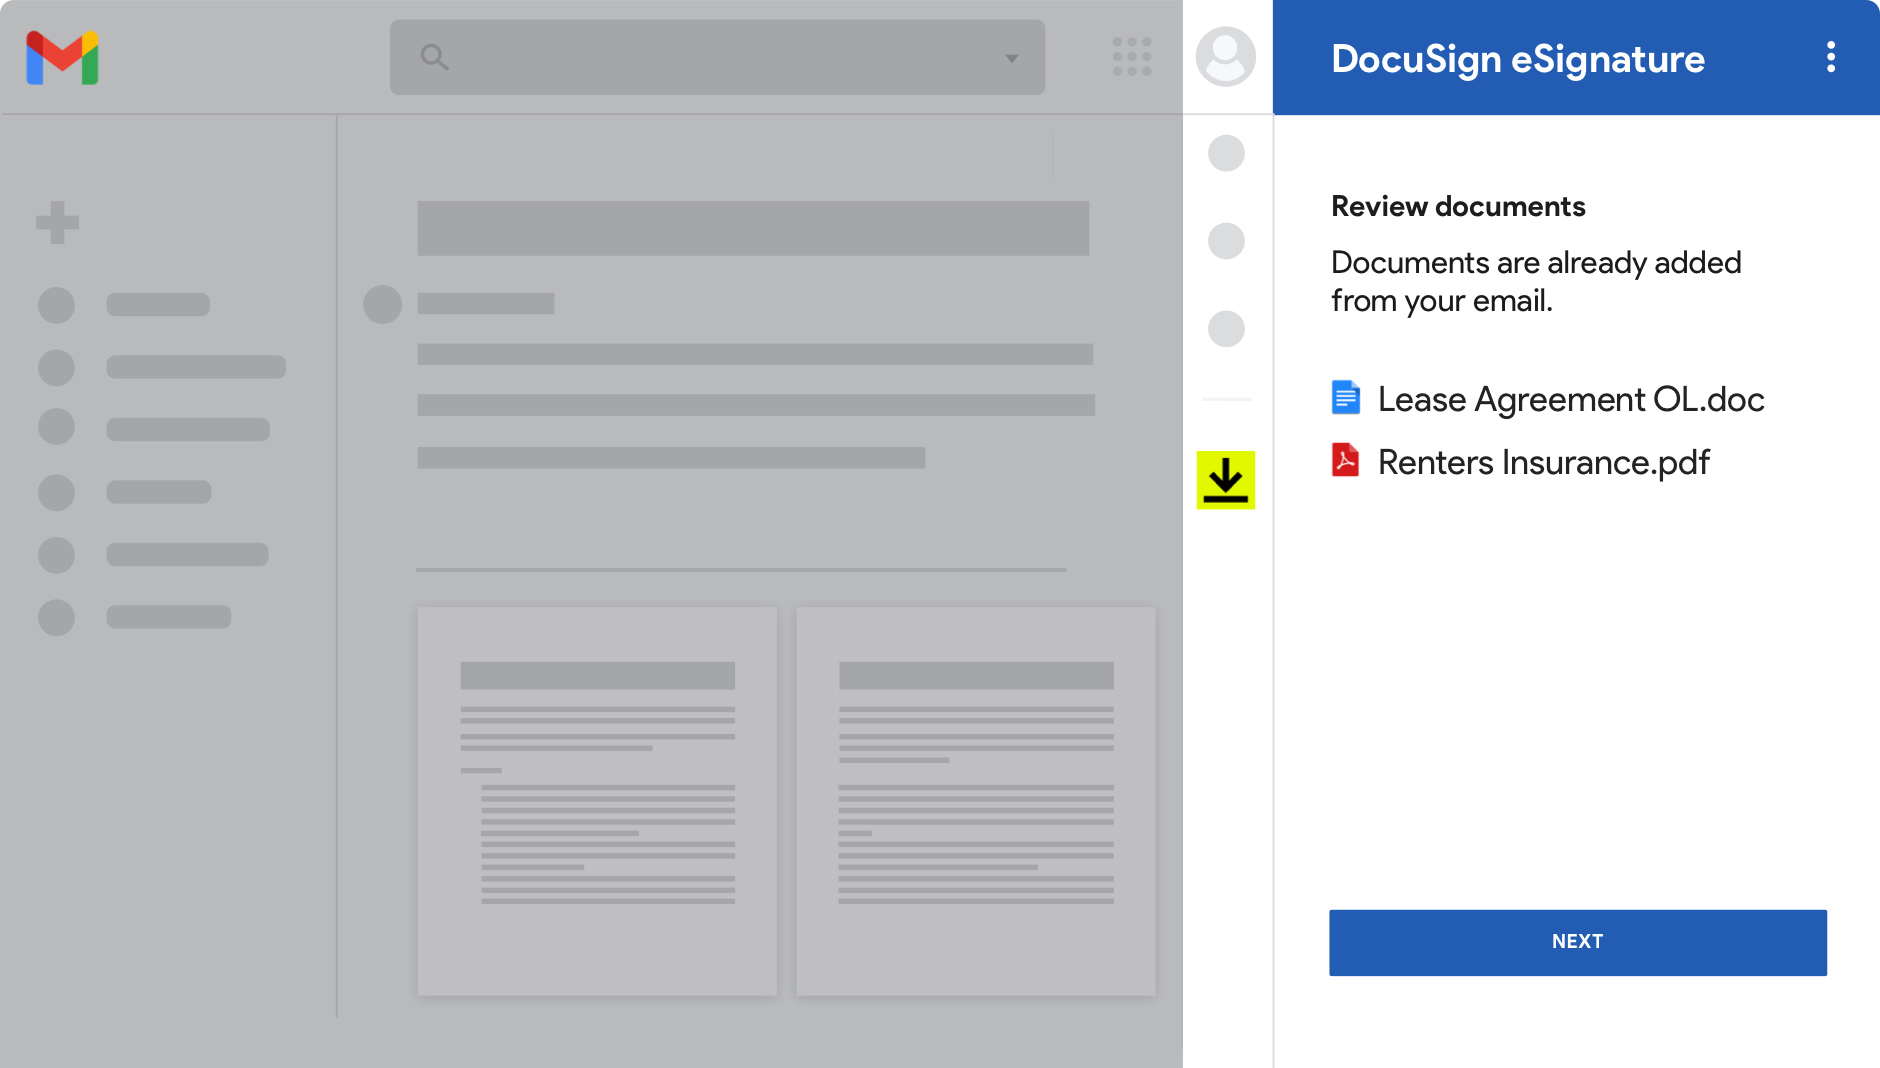 Gmail screenshot showing documents ready for review in DocuSign eSignature.